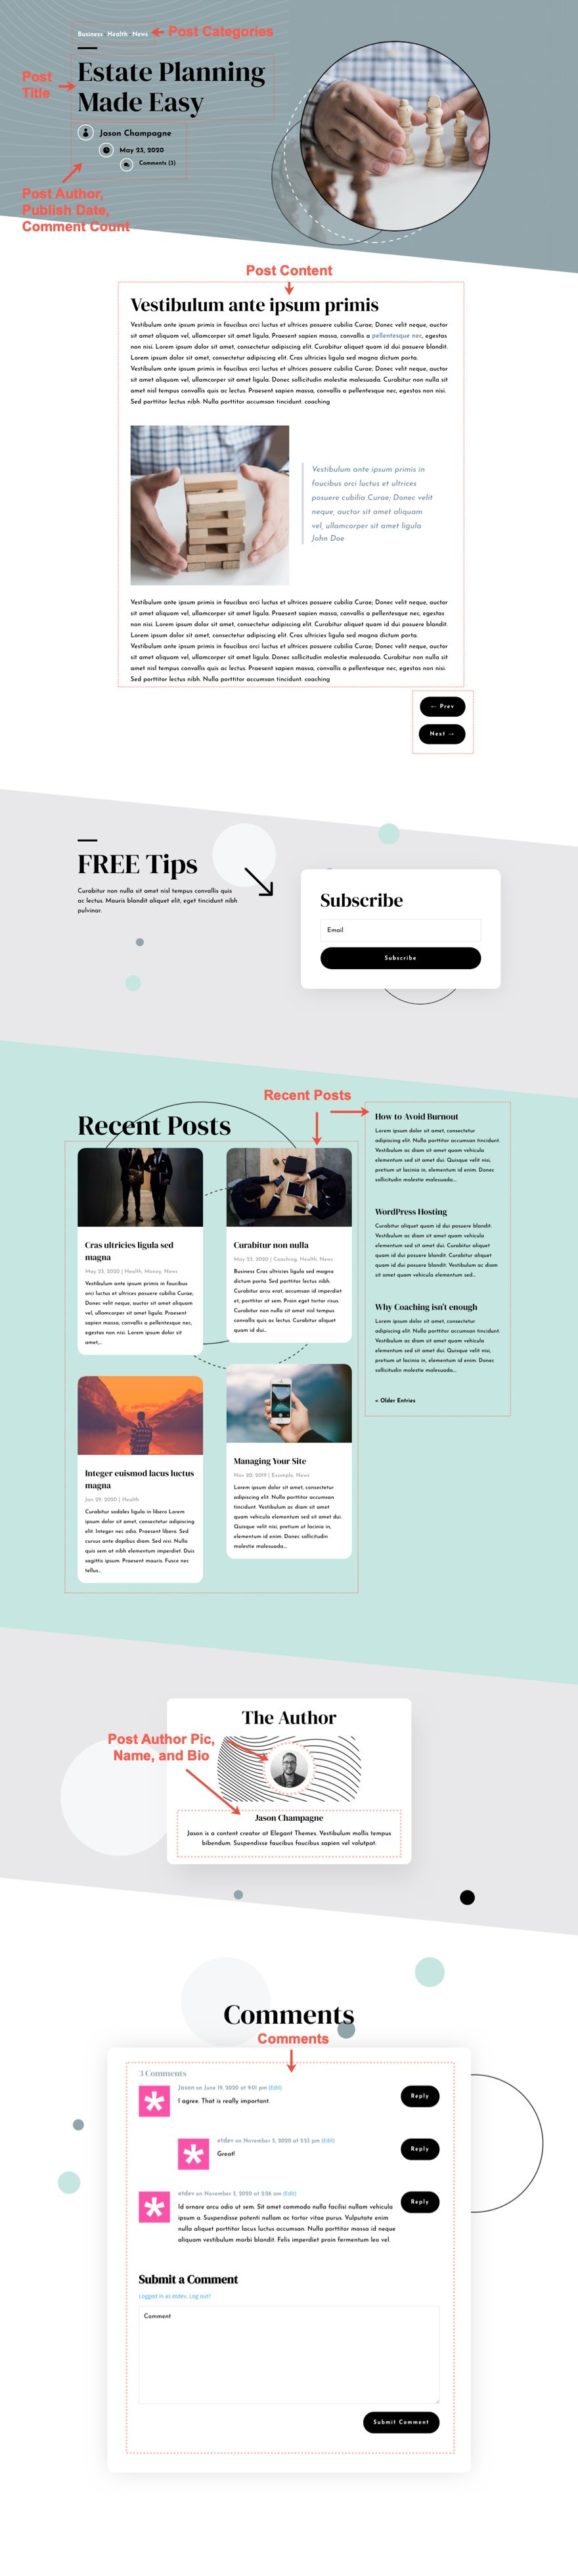 blog post template for Divi's Estate Planning Layout Pack